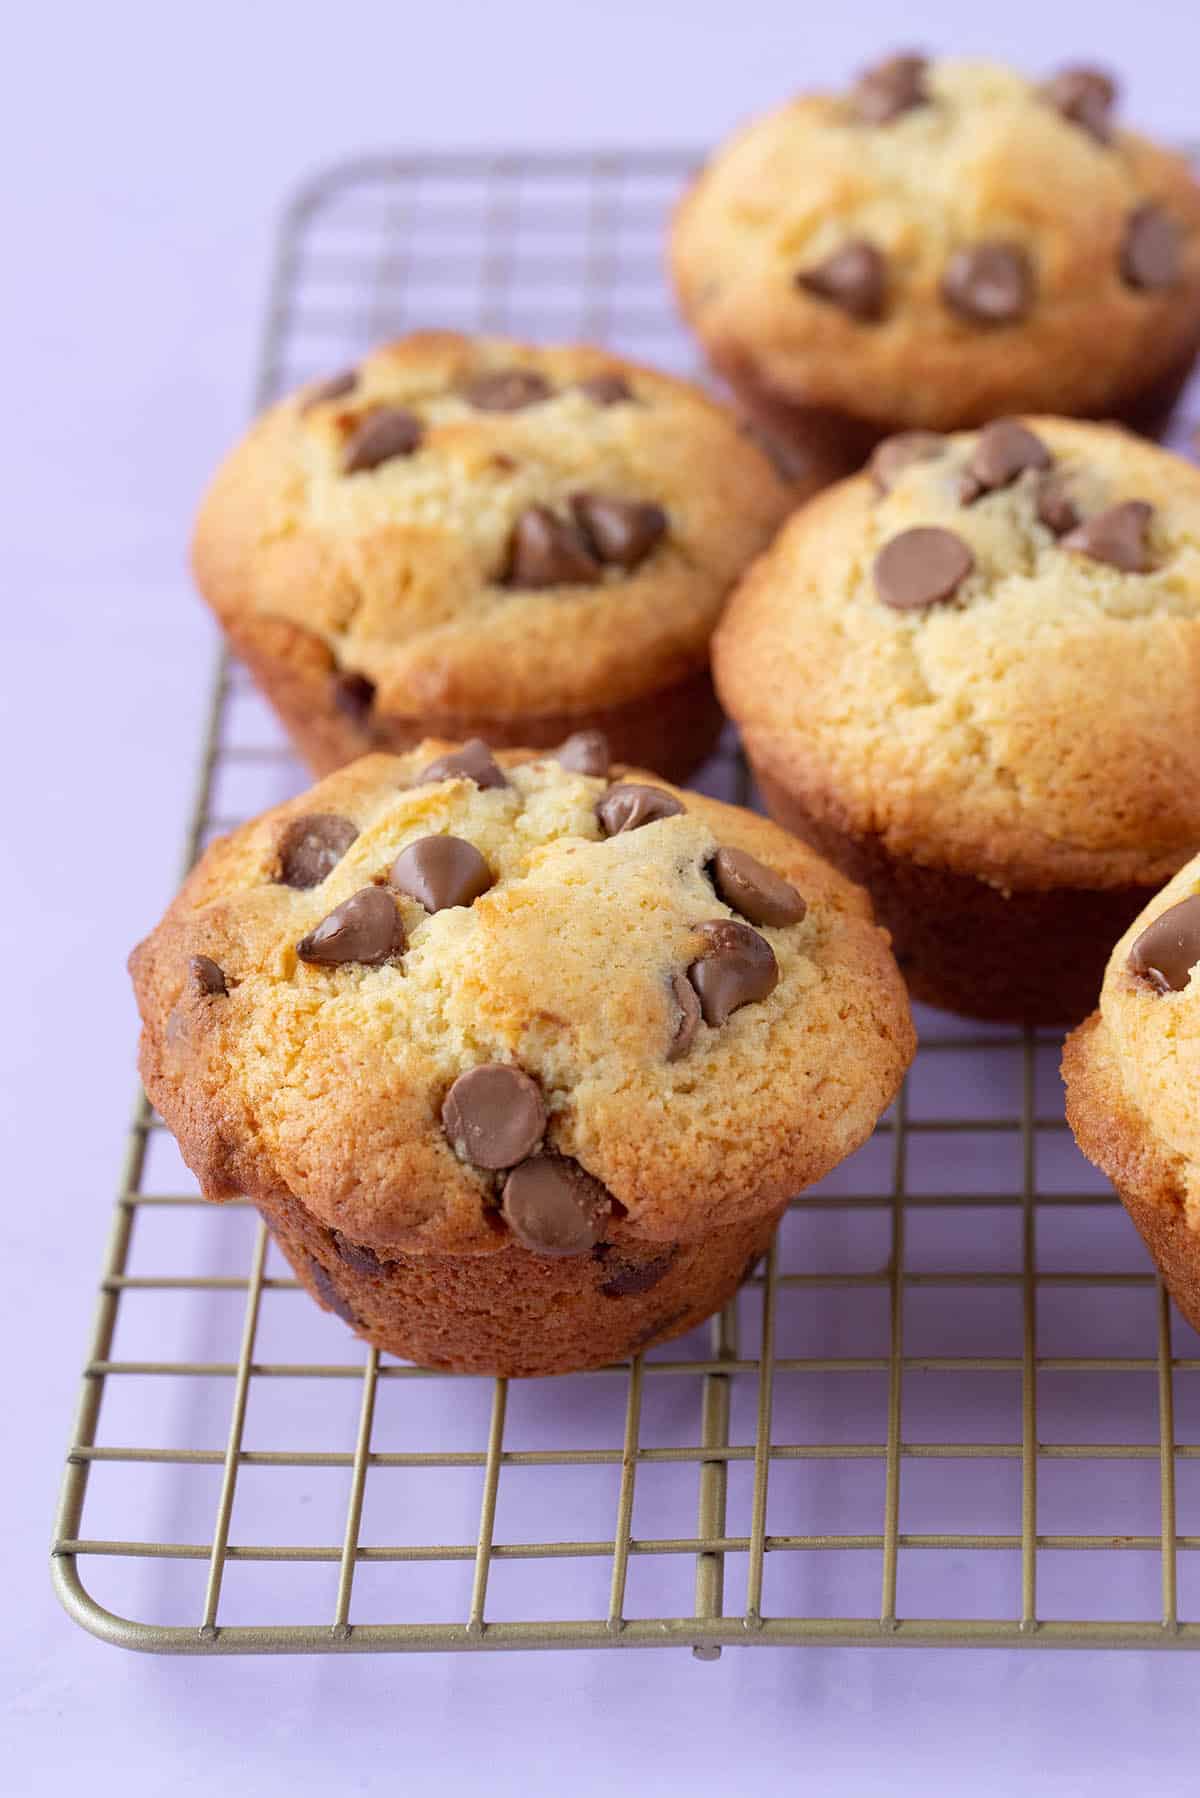 Chocolate chip muffins all sitting on a wire rack.